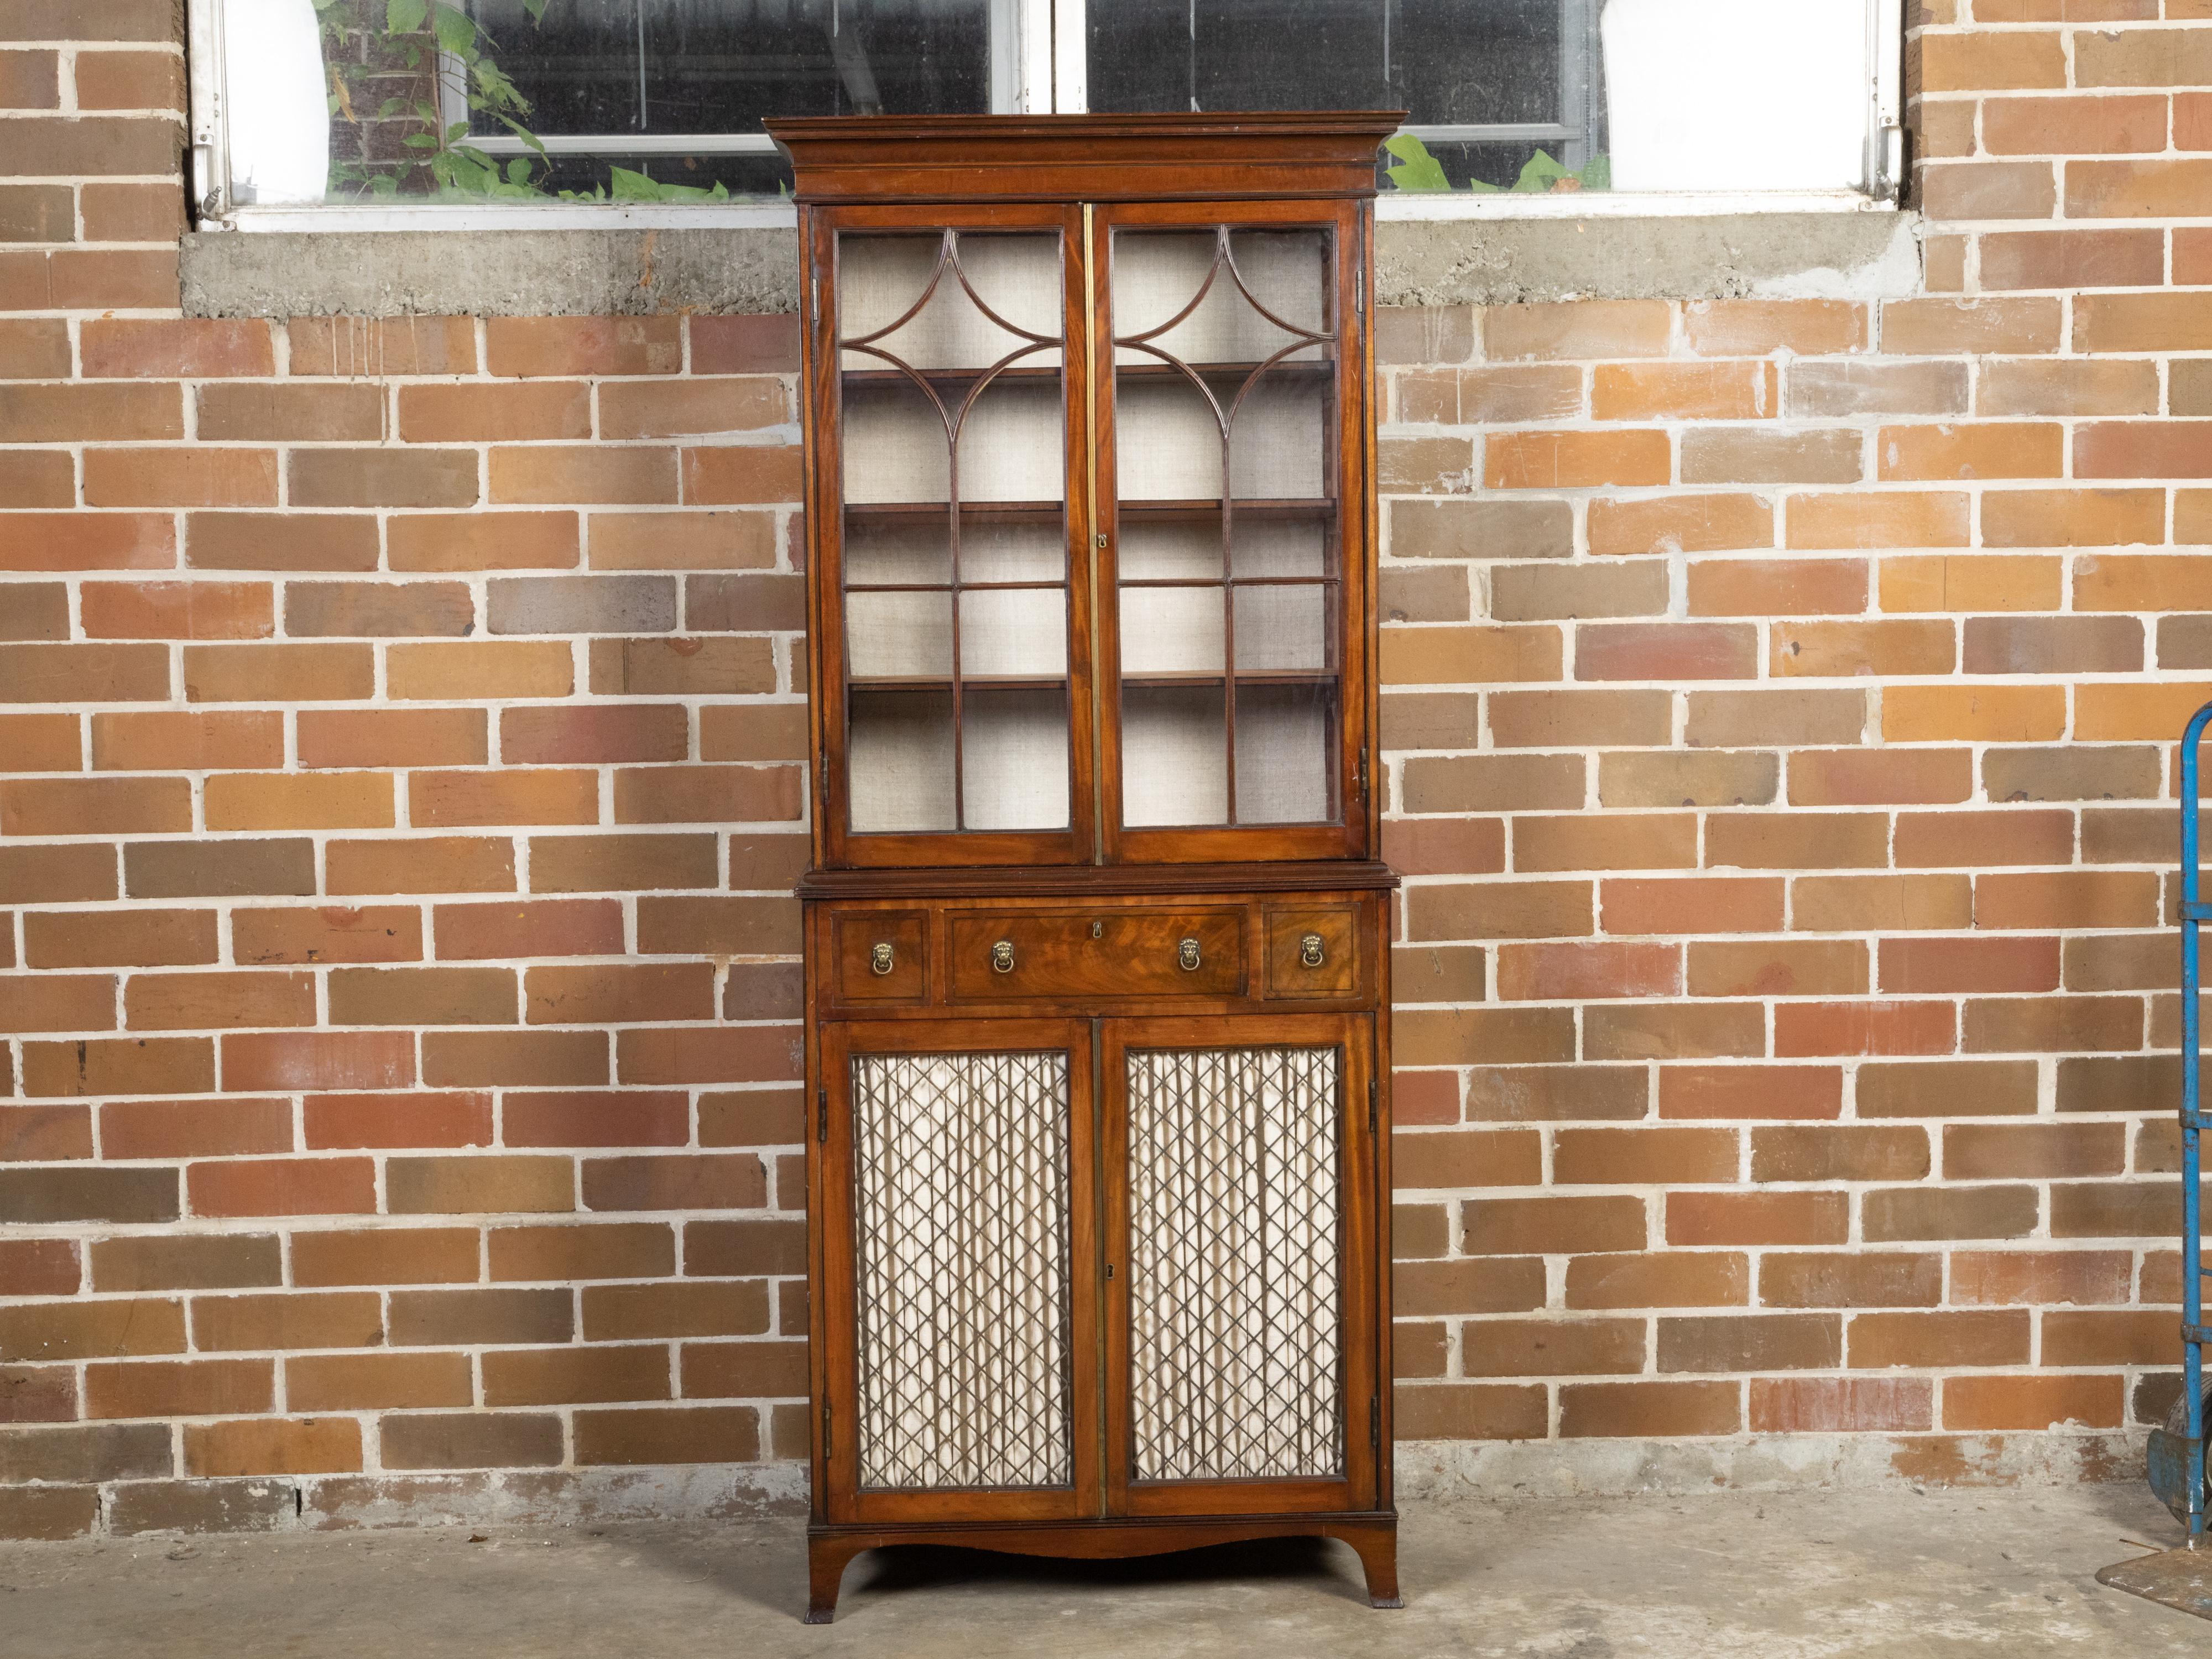 An English mahogany vitrine cabinet from the mid 19th century with glass doors, dark banding, fabric and drawers. Created in England during the second quarter of the 19th century, this vitrine cabinet features a slender silhouette perfectly